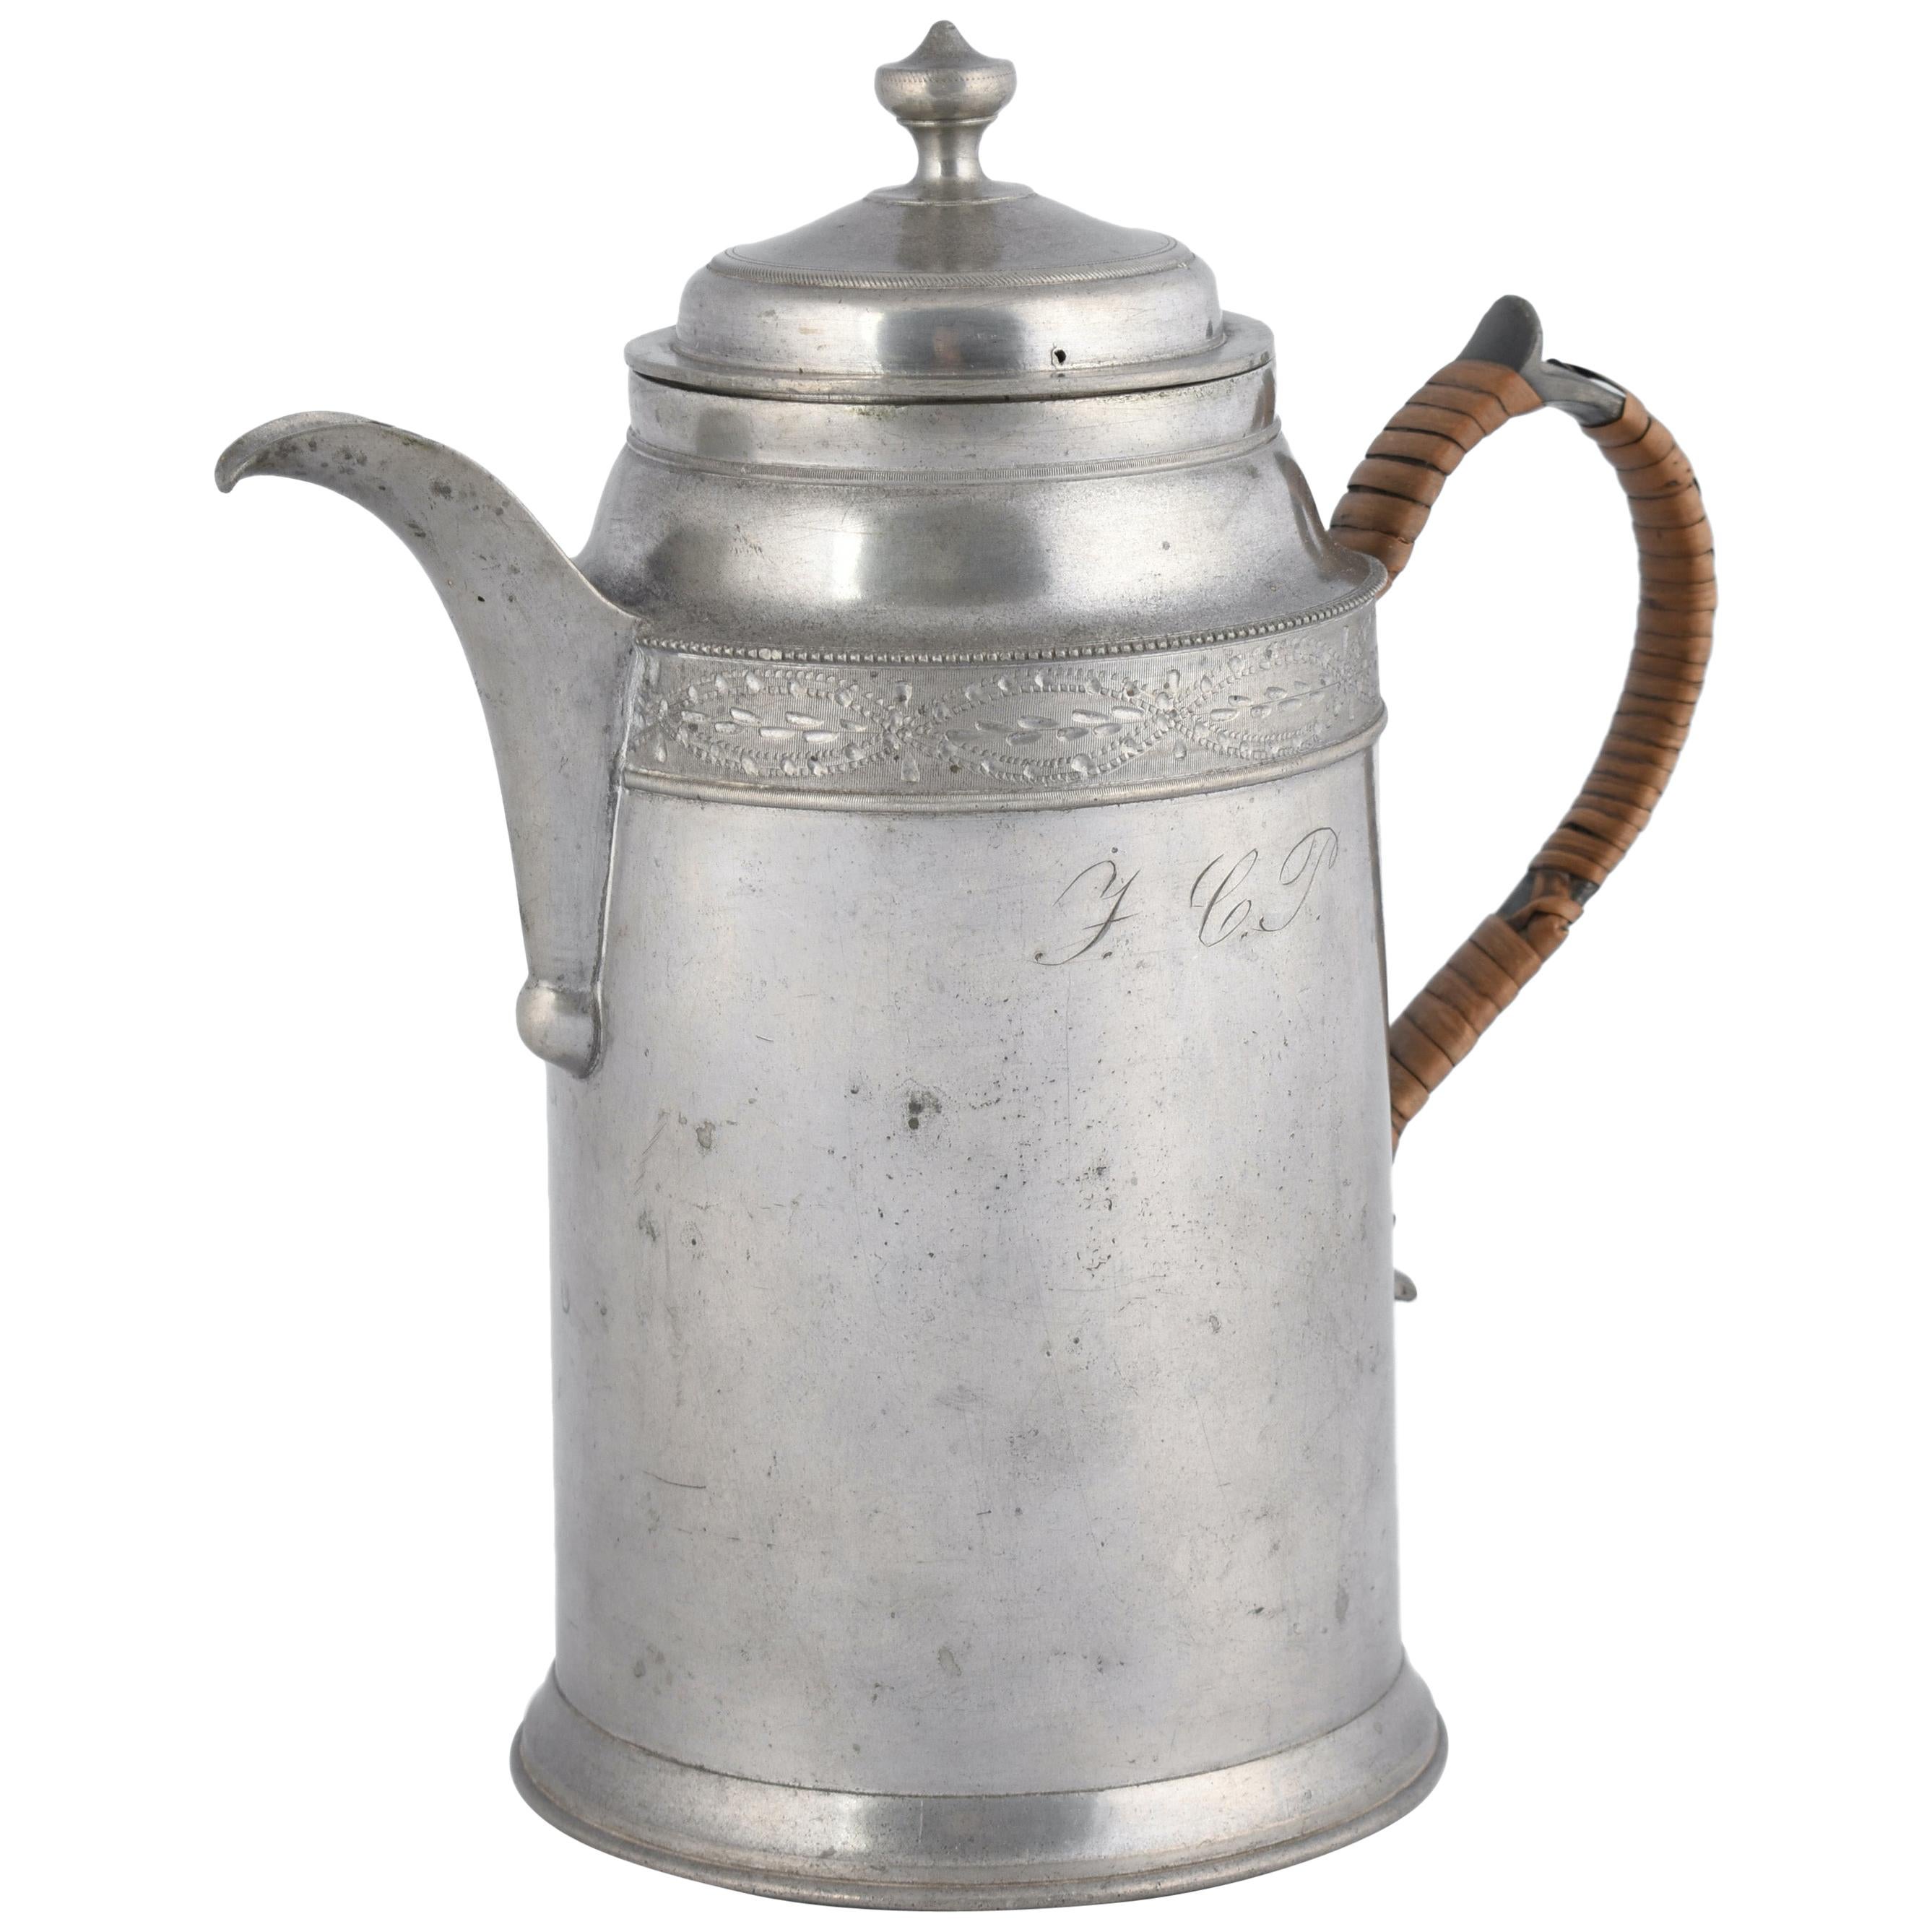 Vintage Jugenstil Coffee Pot by Jacob Heinrich Weiss, Germany Late 19th Century